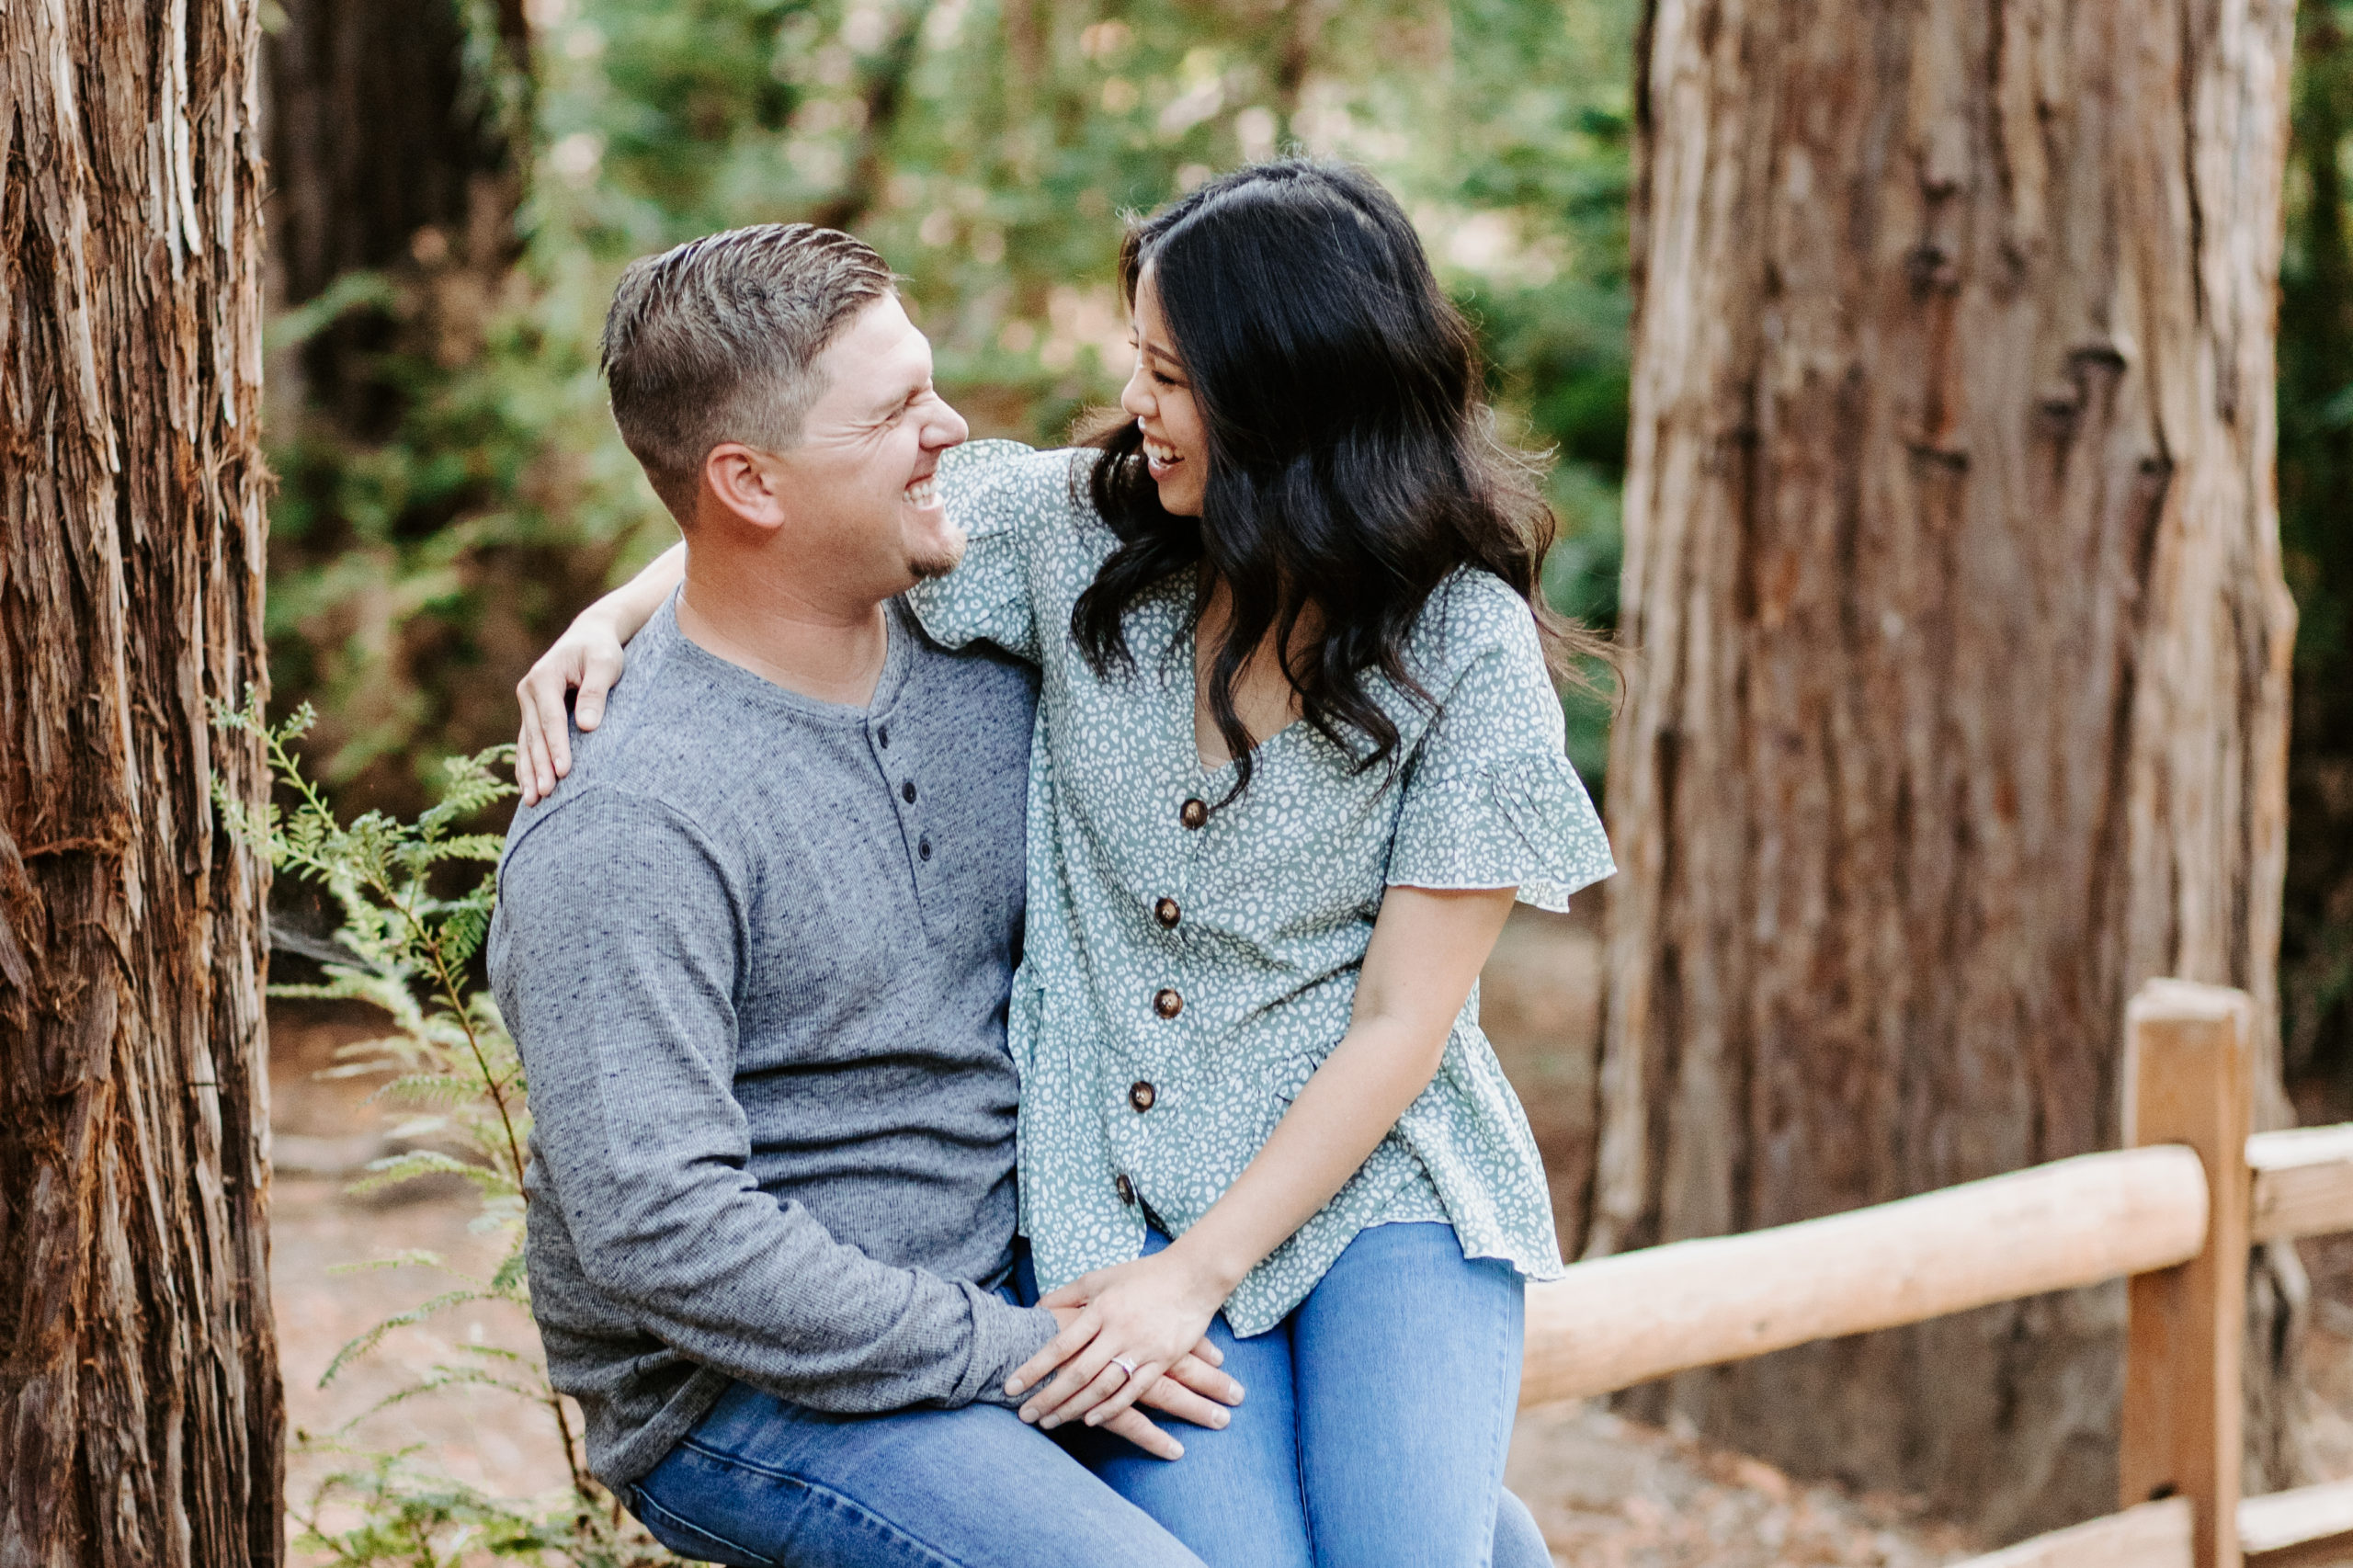 Sunset Engagement Session In Bay Area Redwood Park